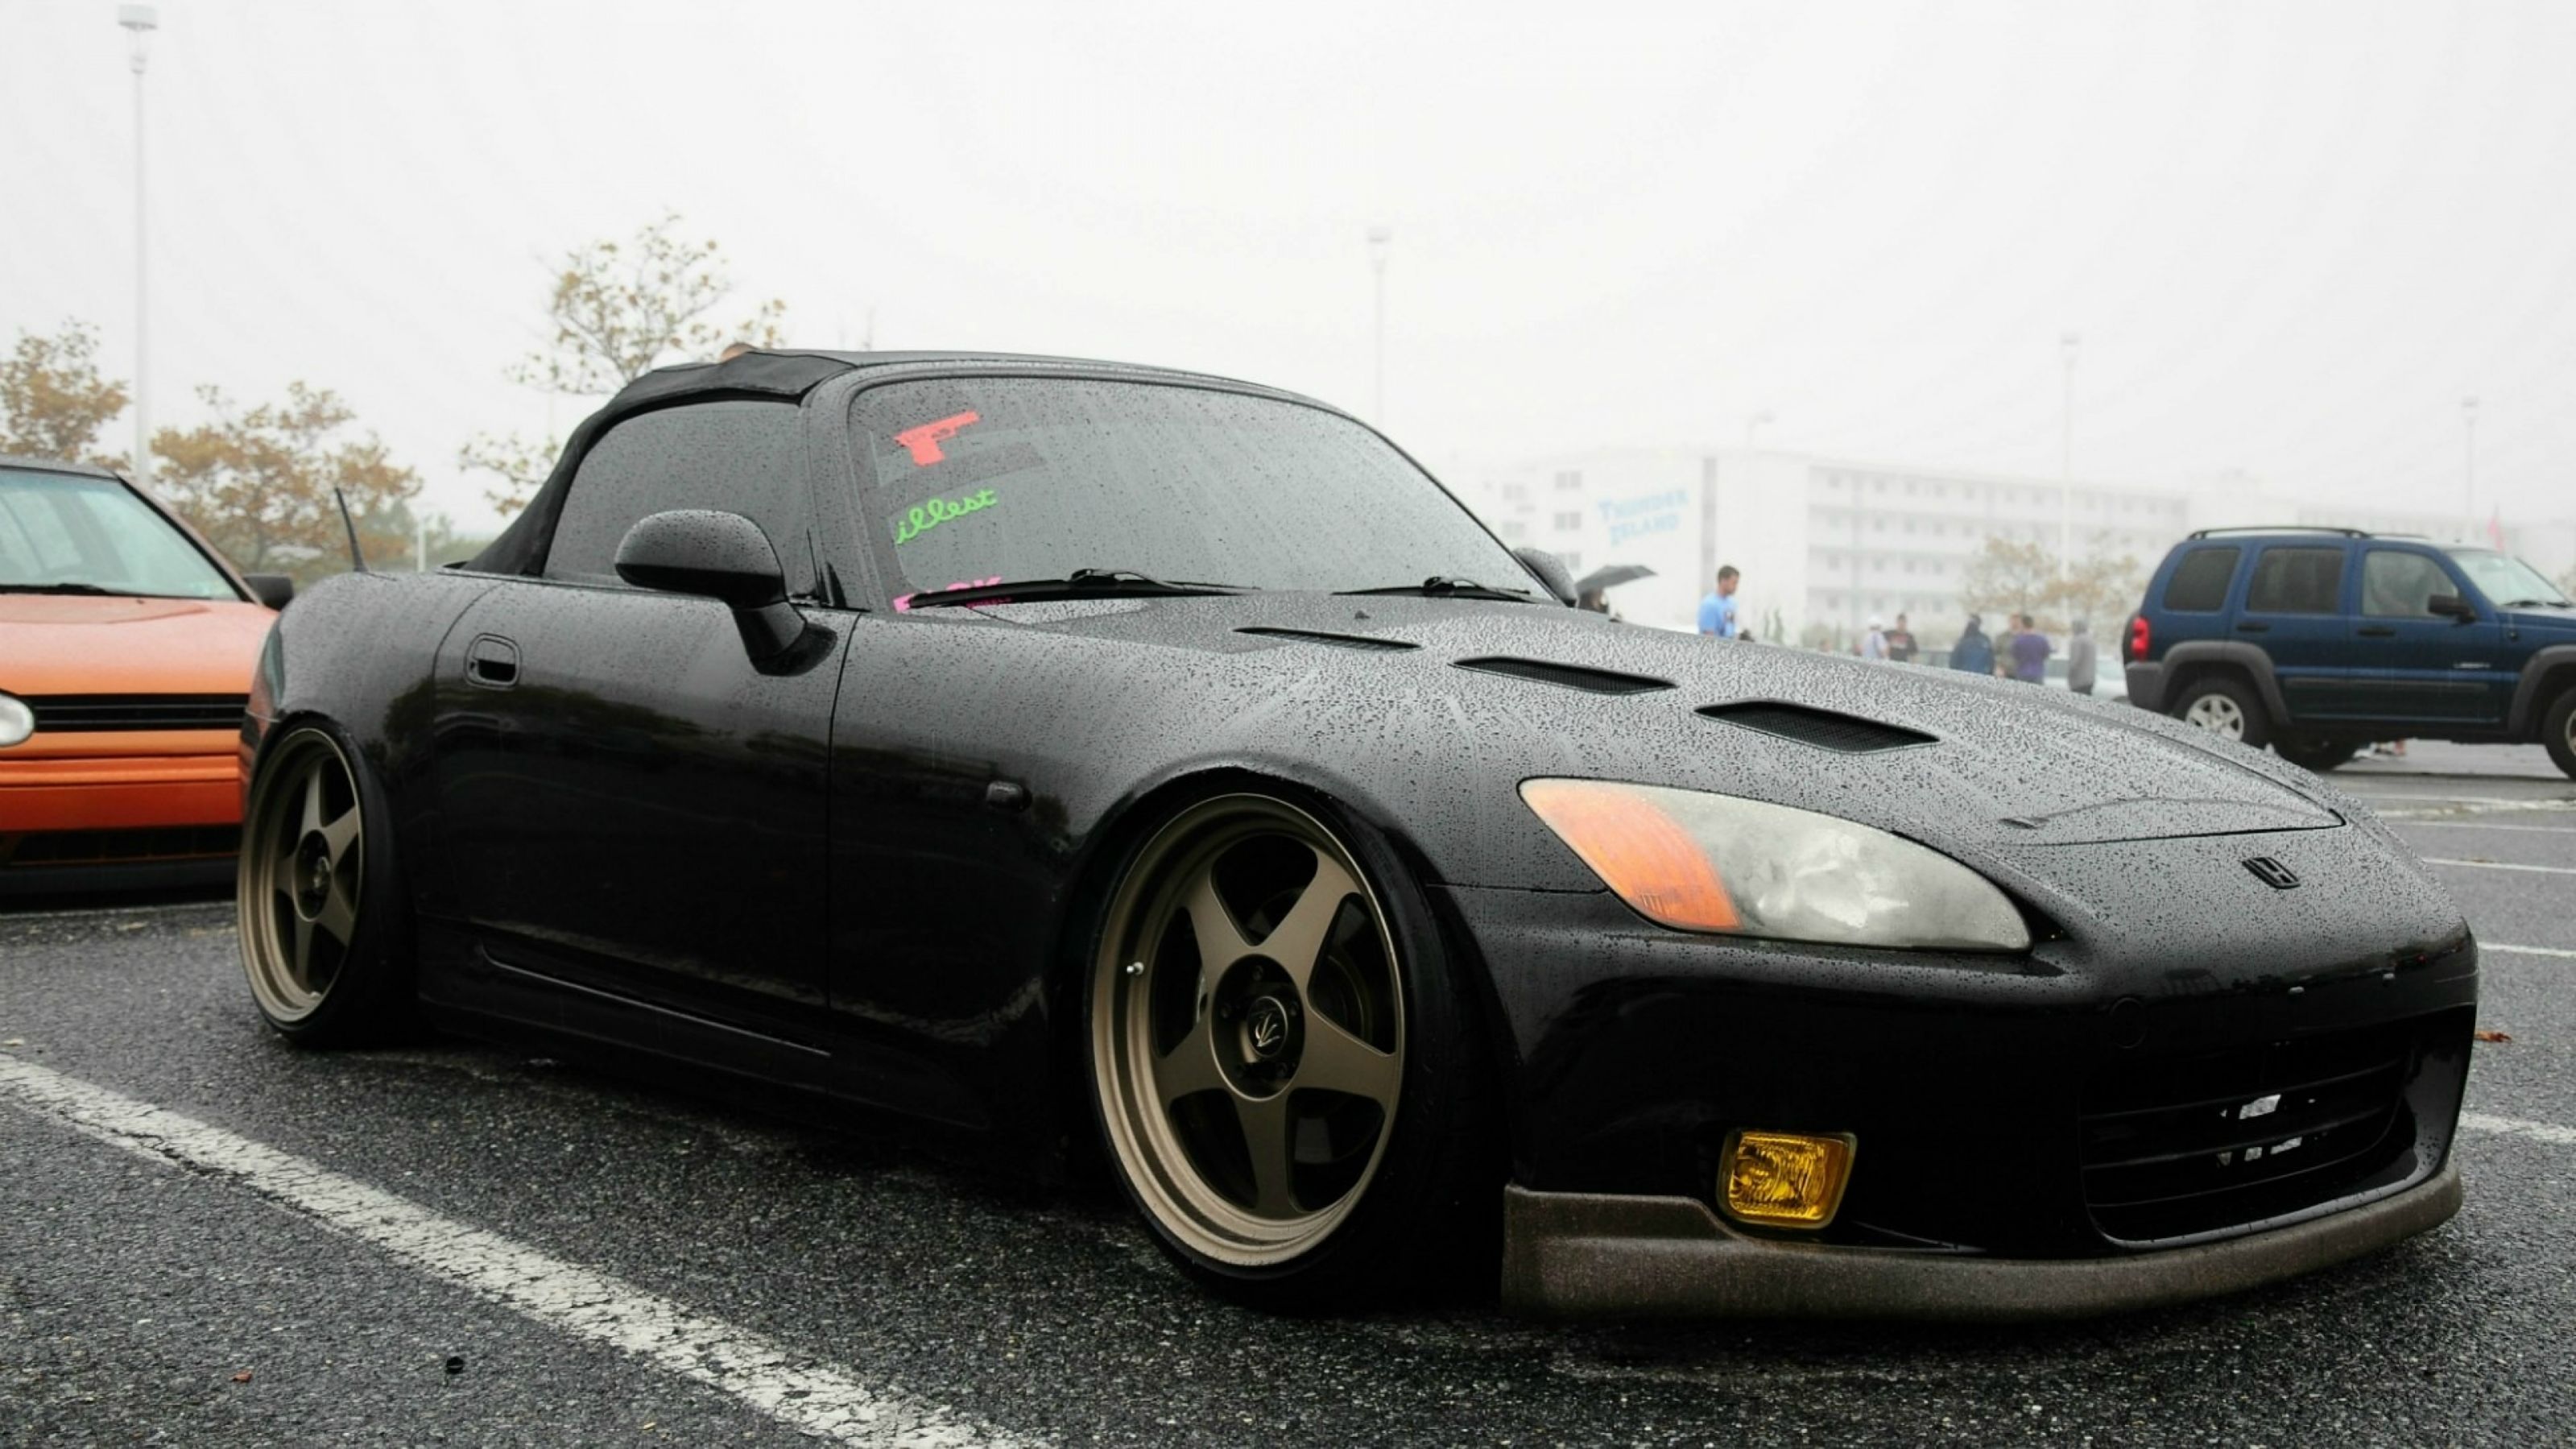 Attainable Dream Cars Anyone S2k Has My Vote X Pikdit